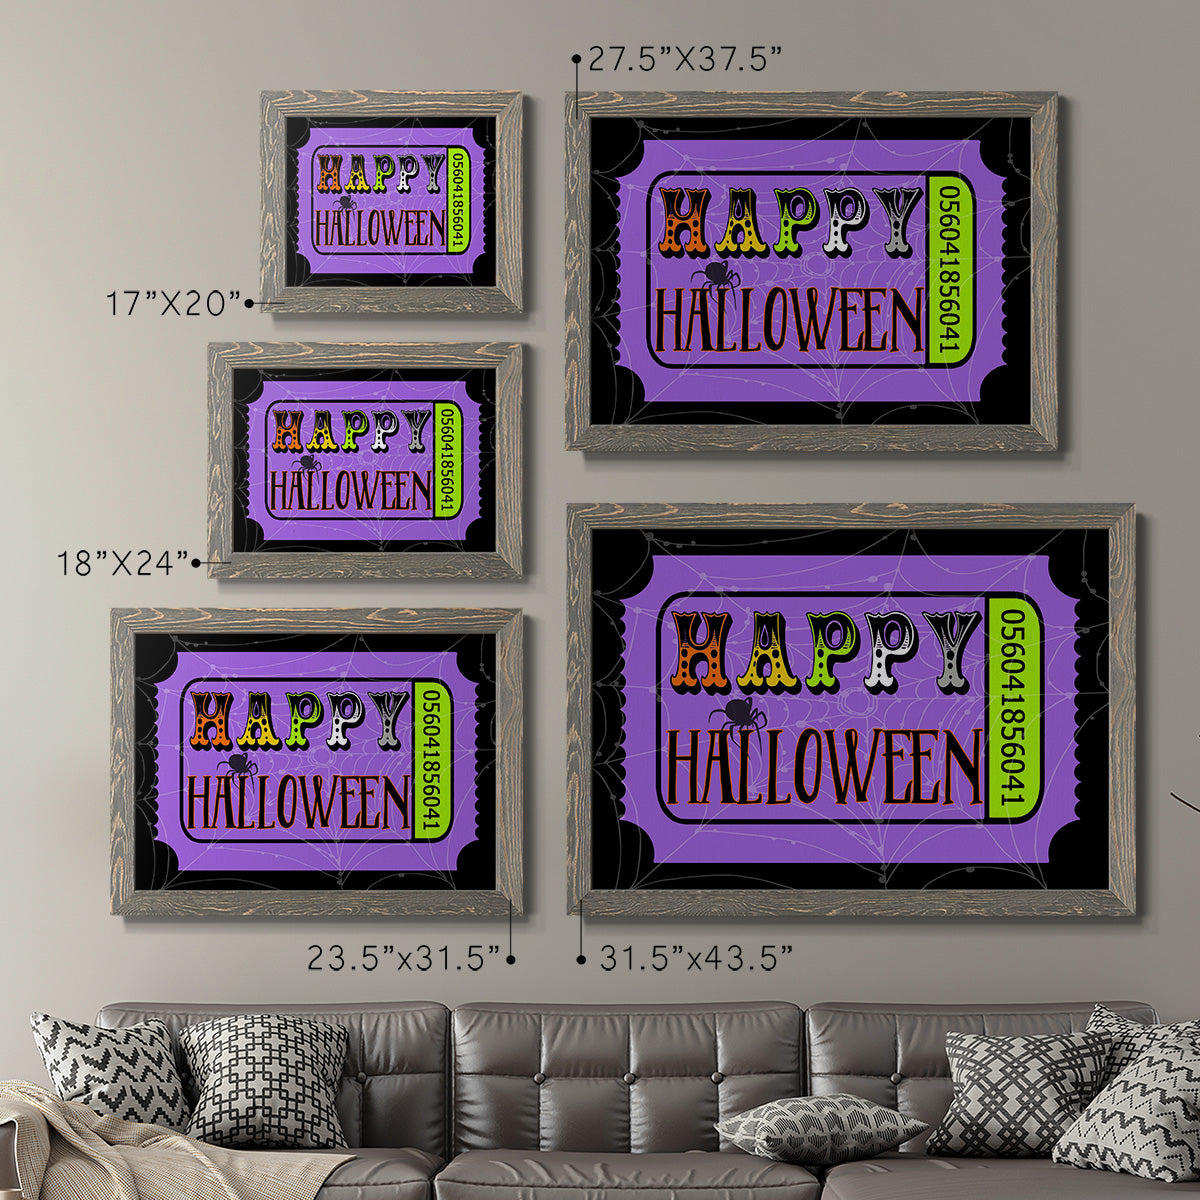 Happy Halloween Ticket-Premium Framed Canvas - Ready to Hang